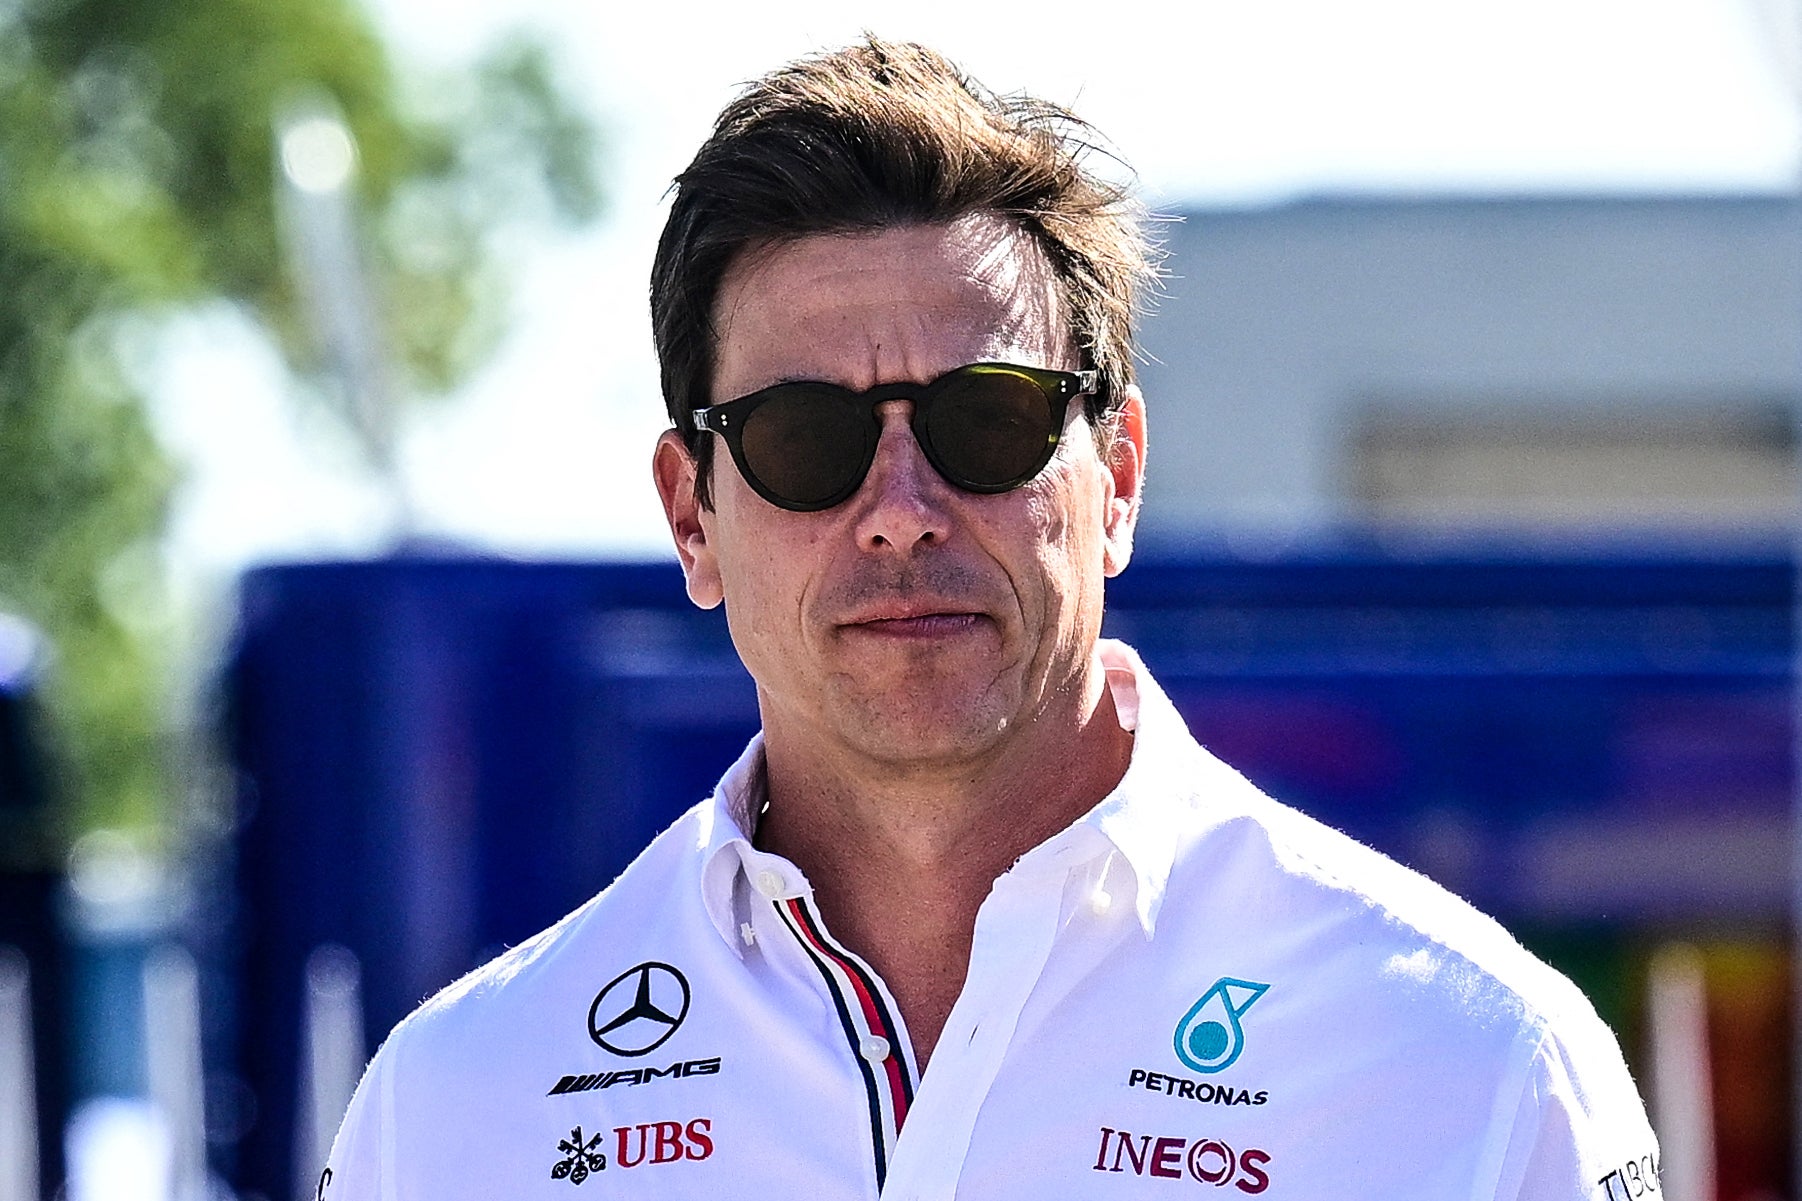 Toto Wolff said race director Niels Wittich had done his job